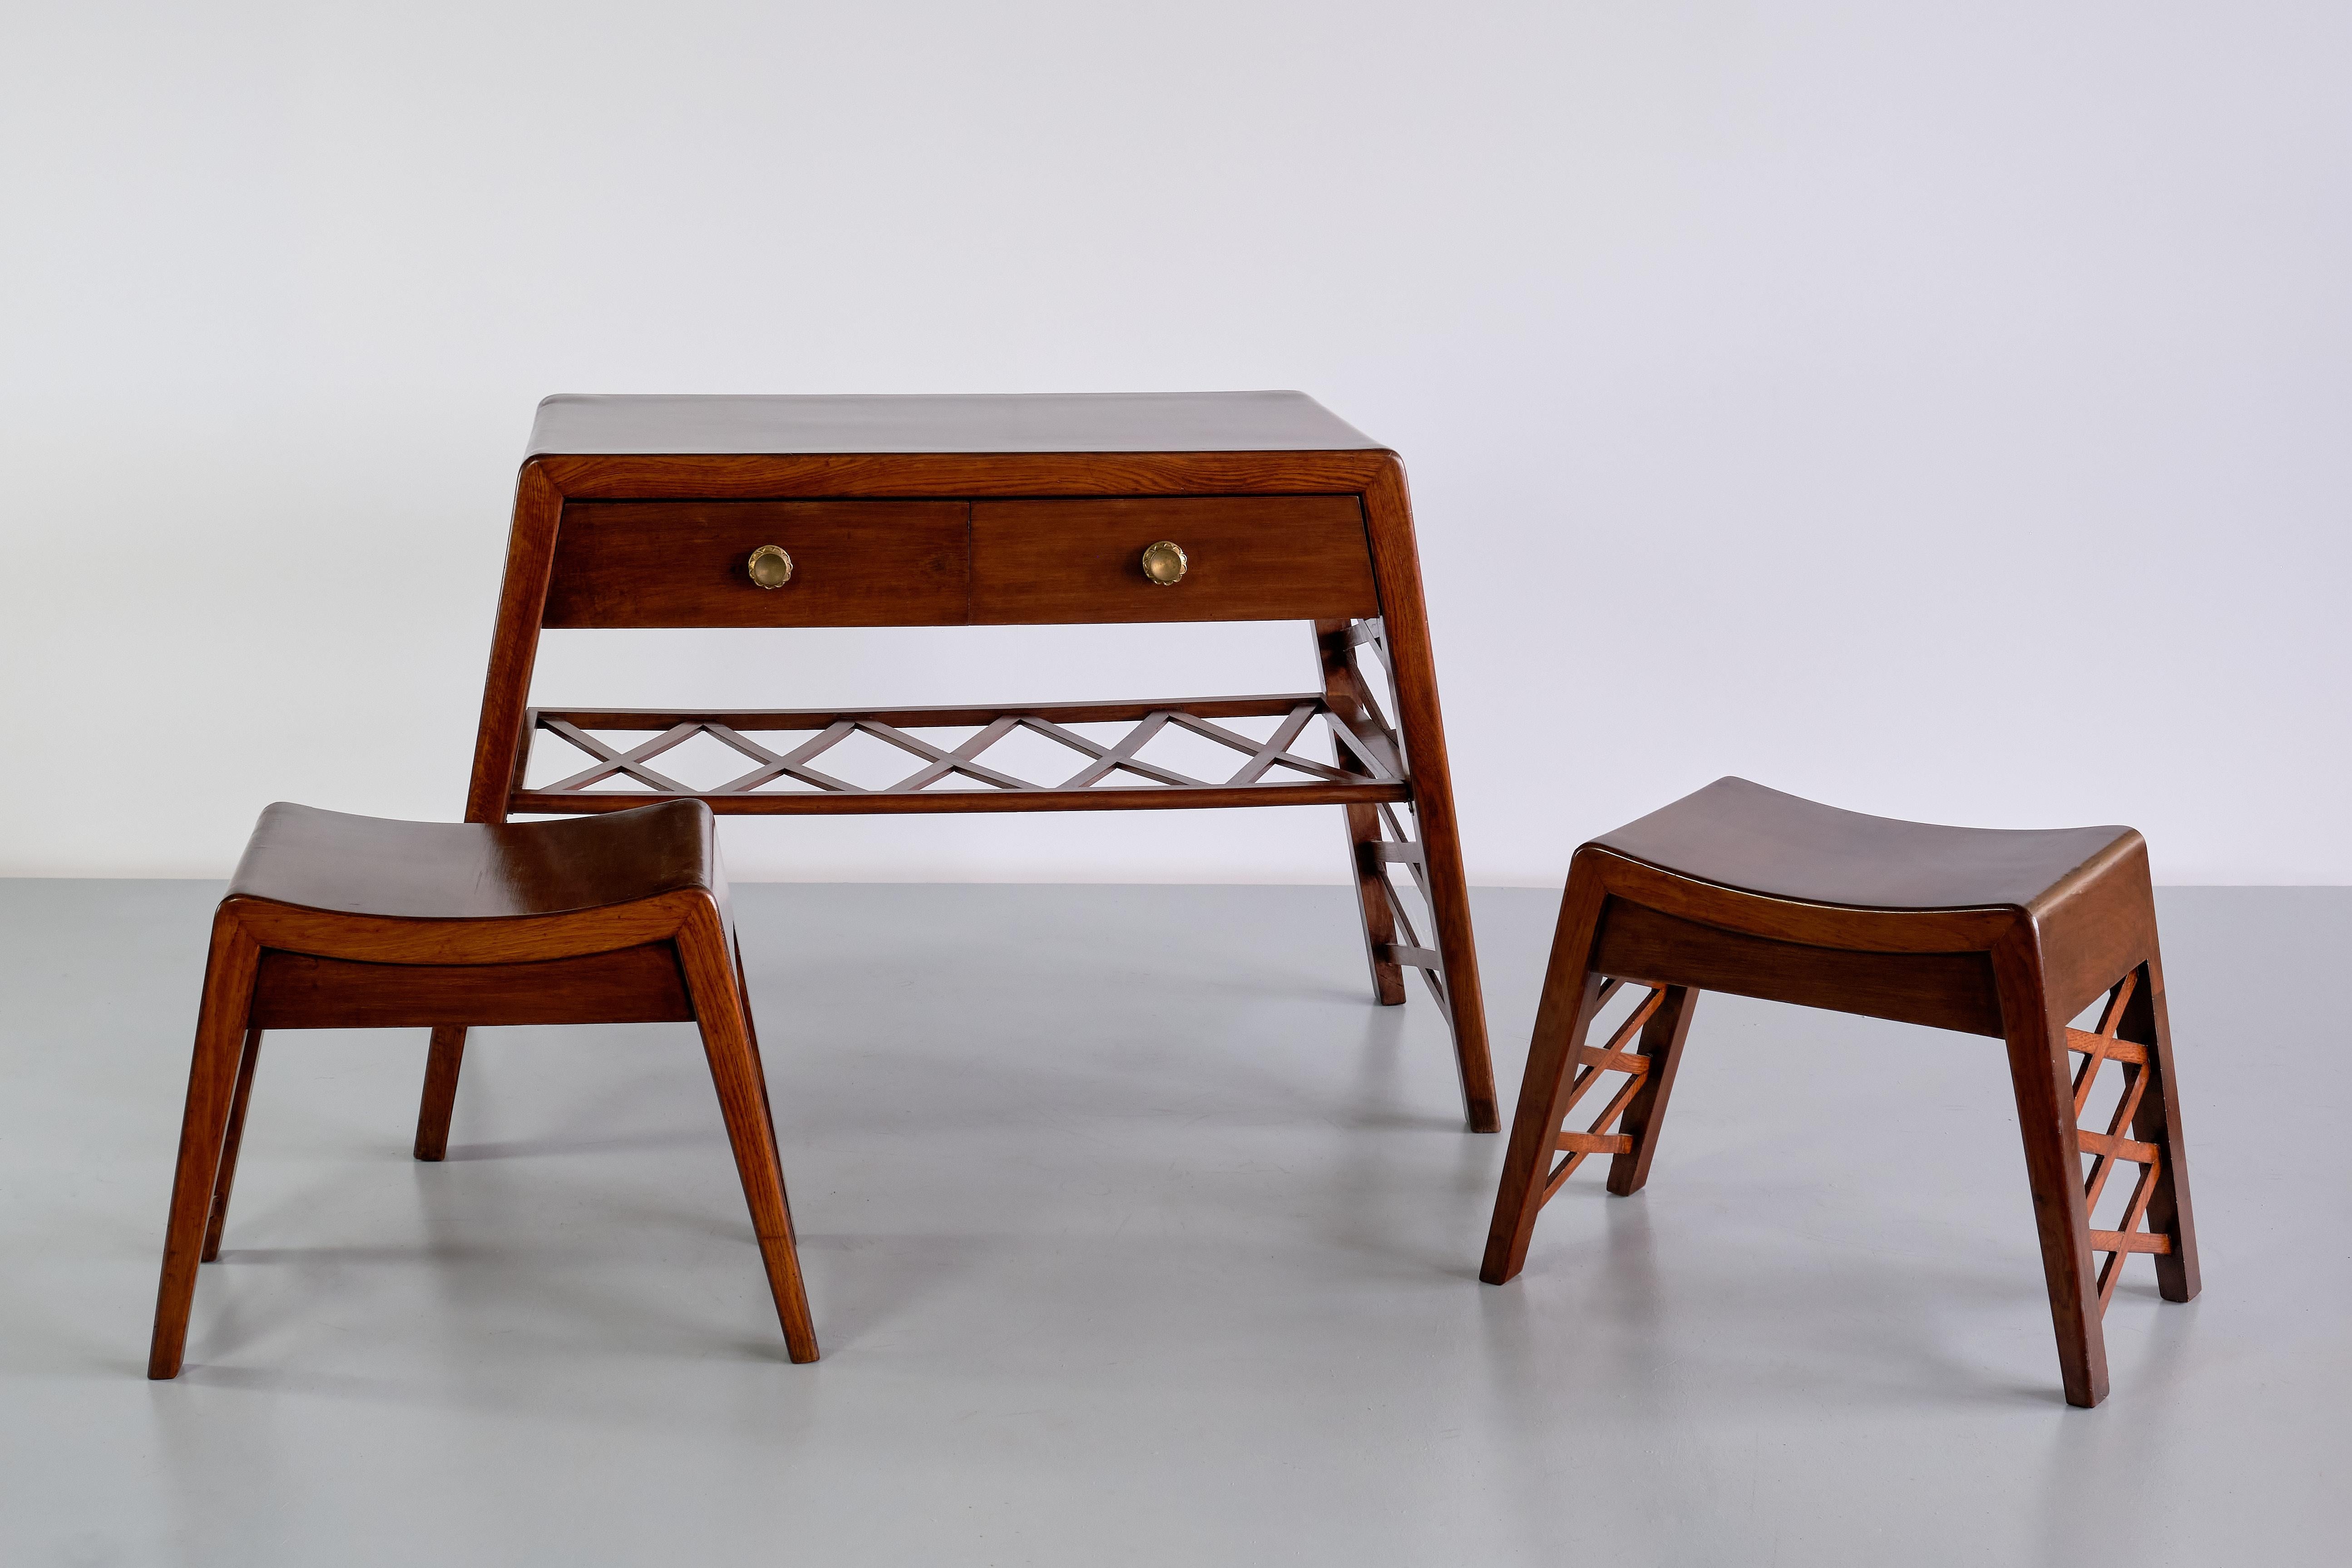 Piero Portaluppi Attributed Pair of Stools in Chestnut Wood, Italy, Late 1930s For Sale 8